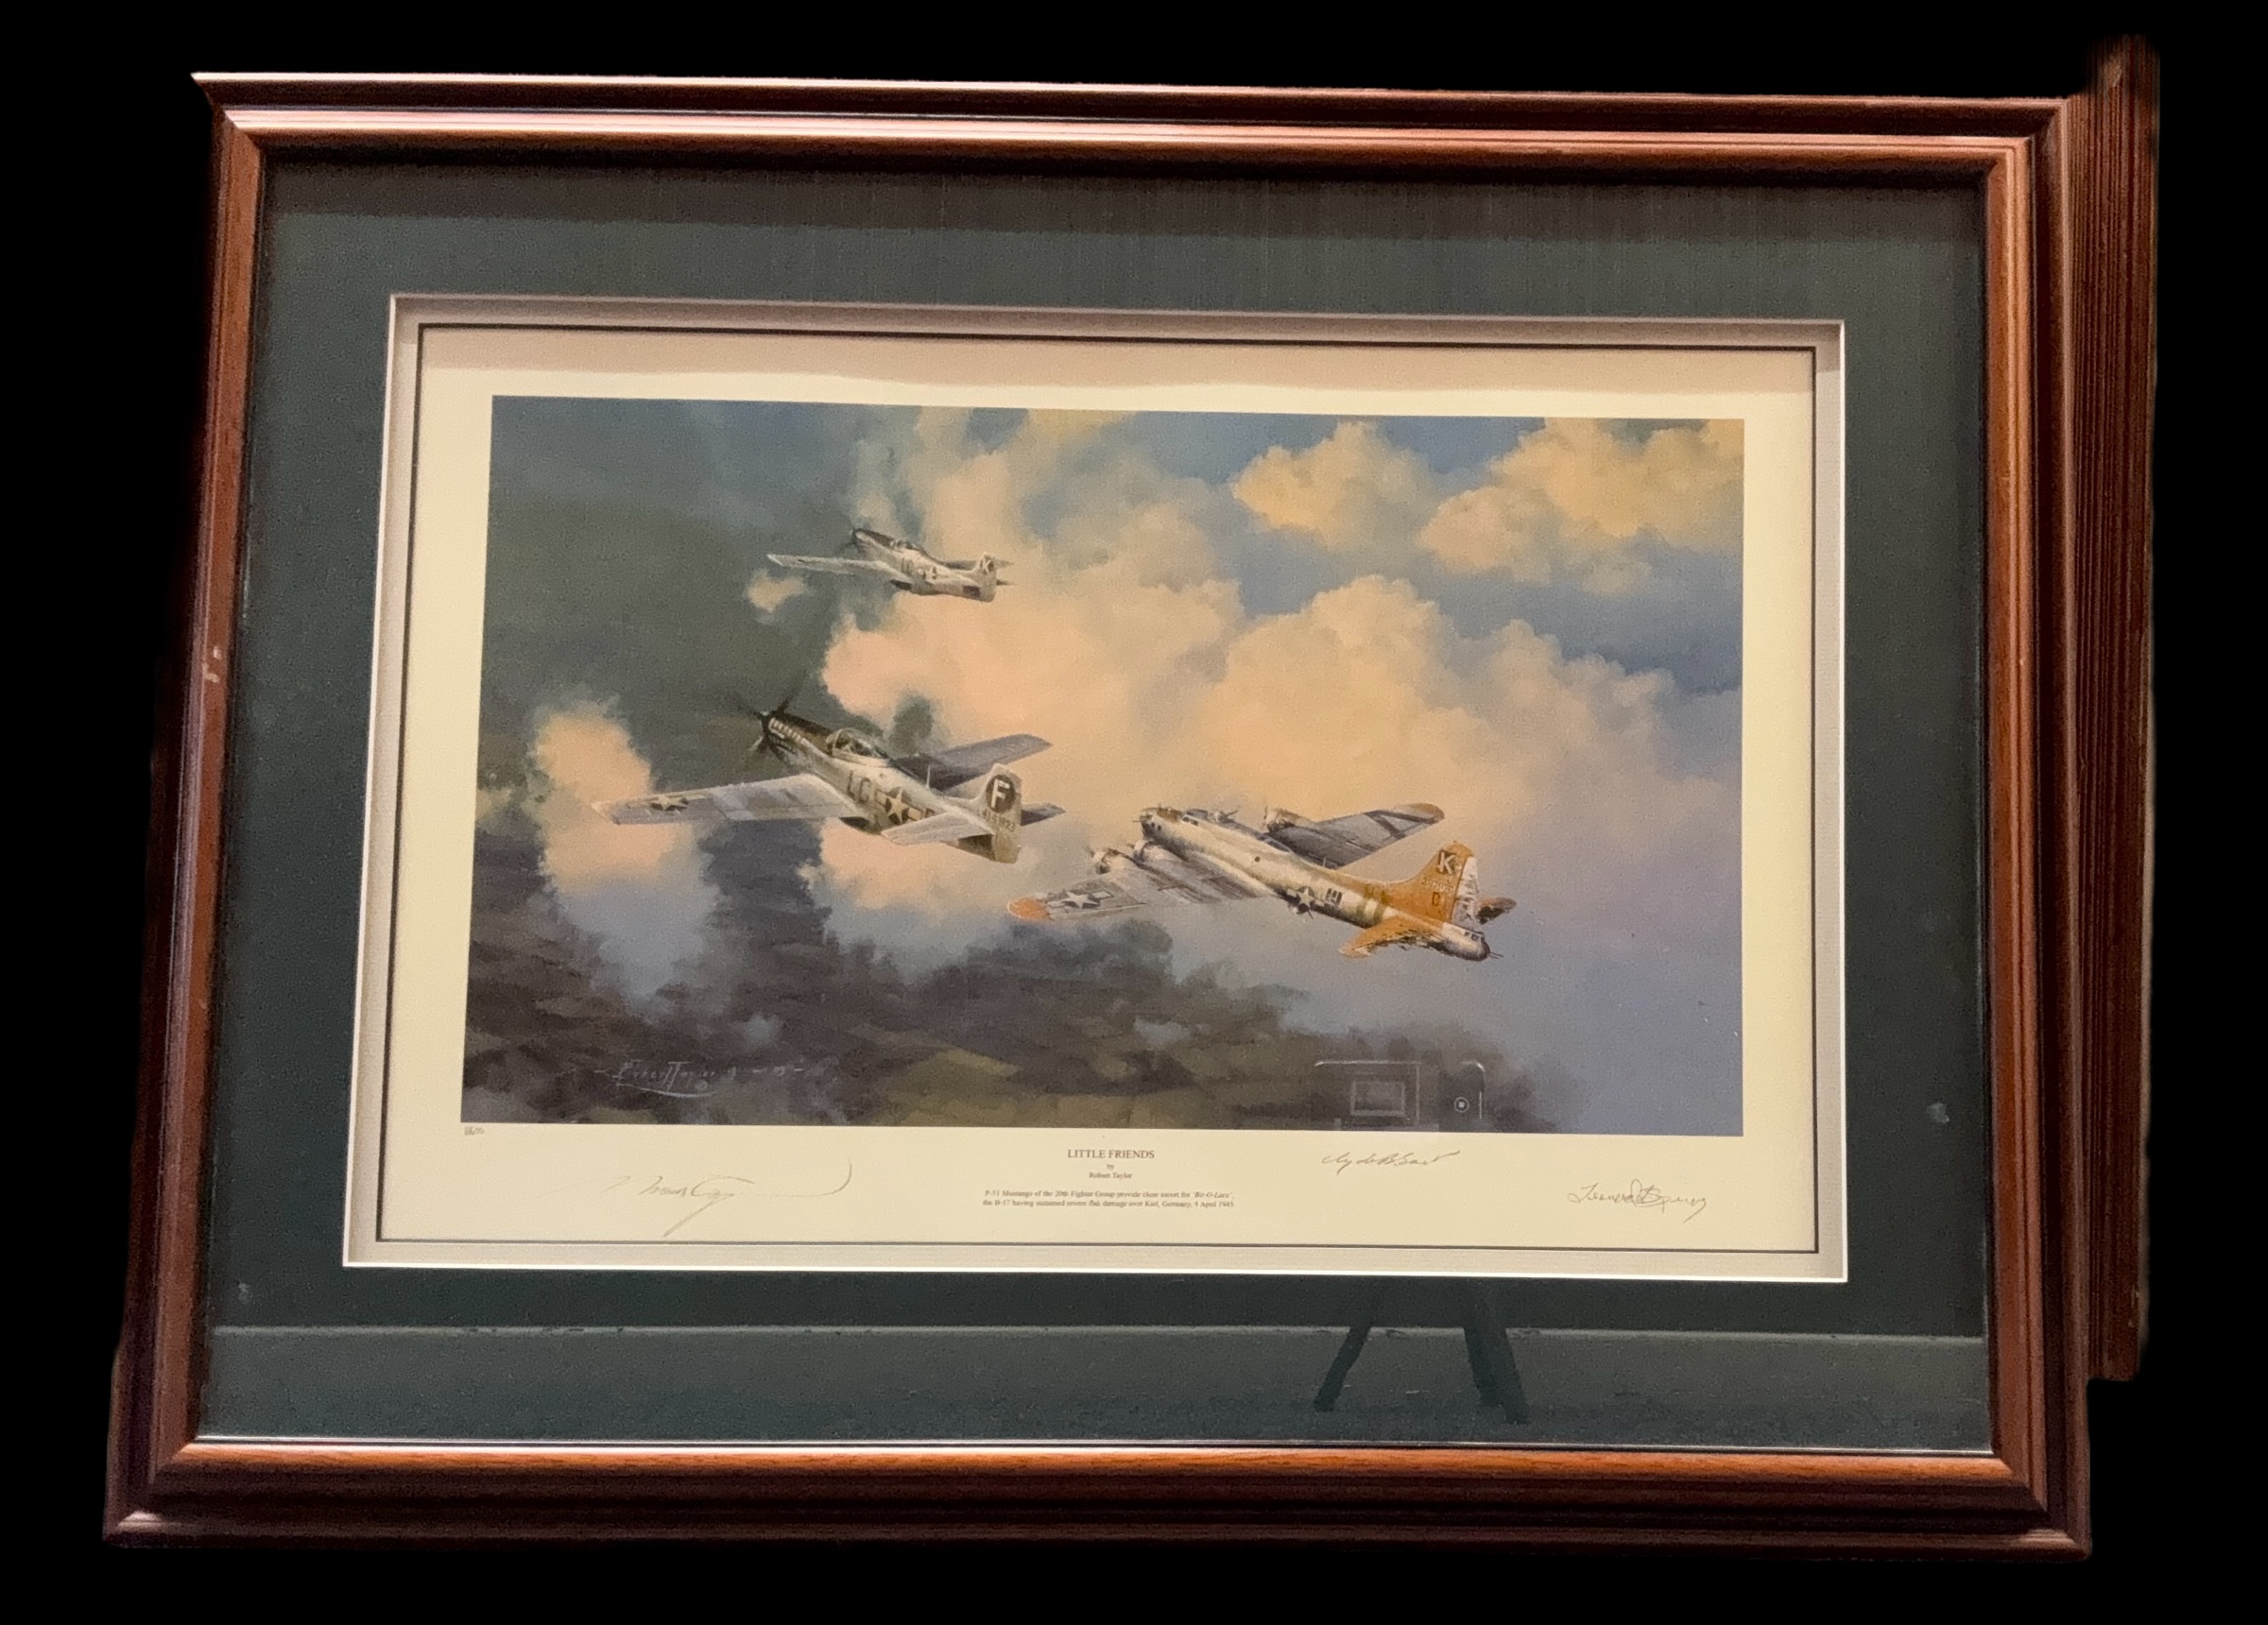 Little Friends WWII print 32x24 inch framed and mounted signed in pencil by the artist Robert - Image 3 of 3